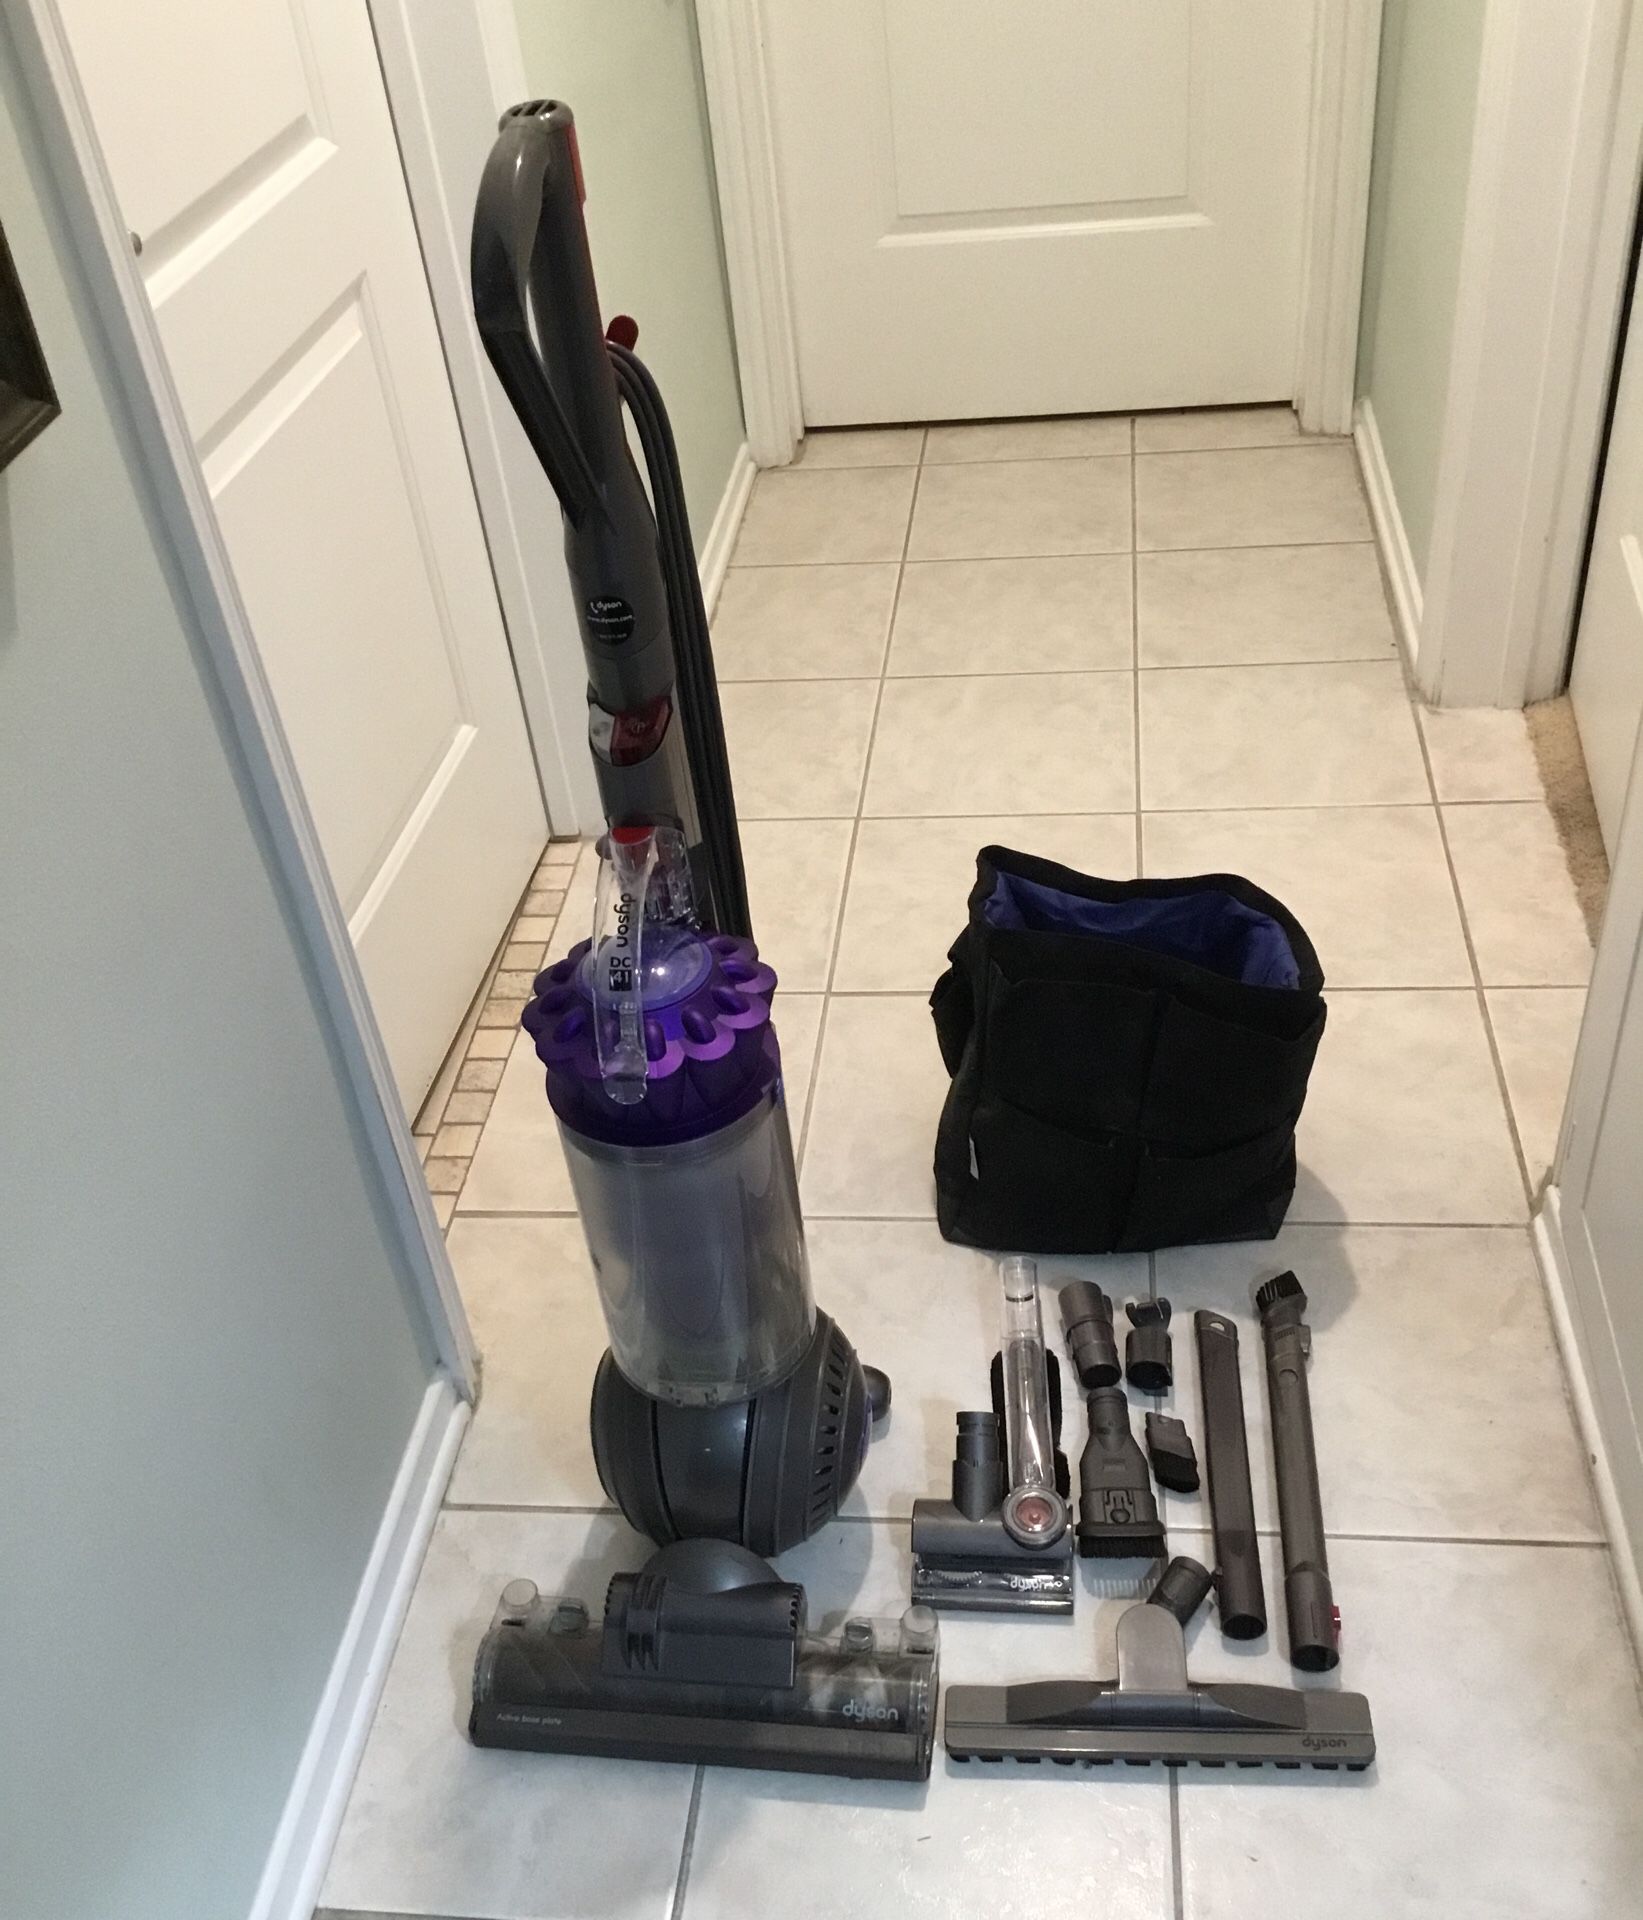 Dyson DC41 Animal Ball upright vacuum with attachments